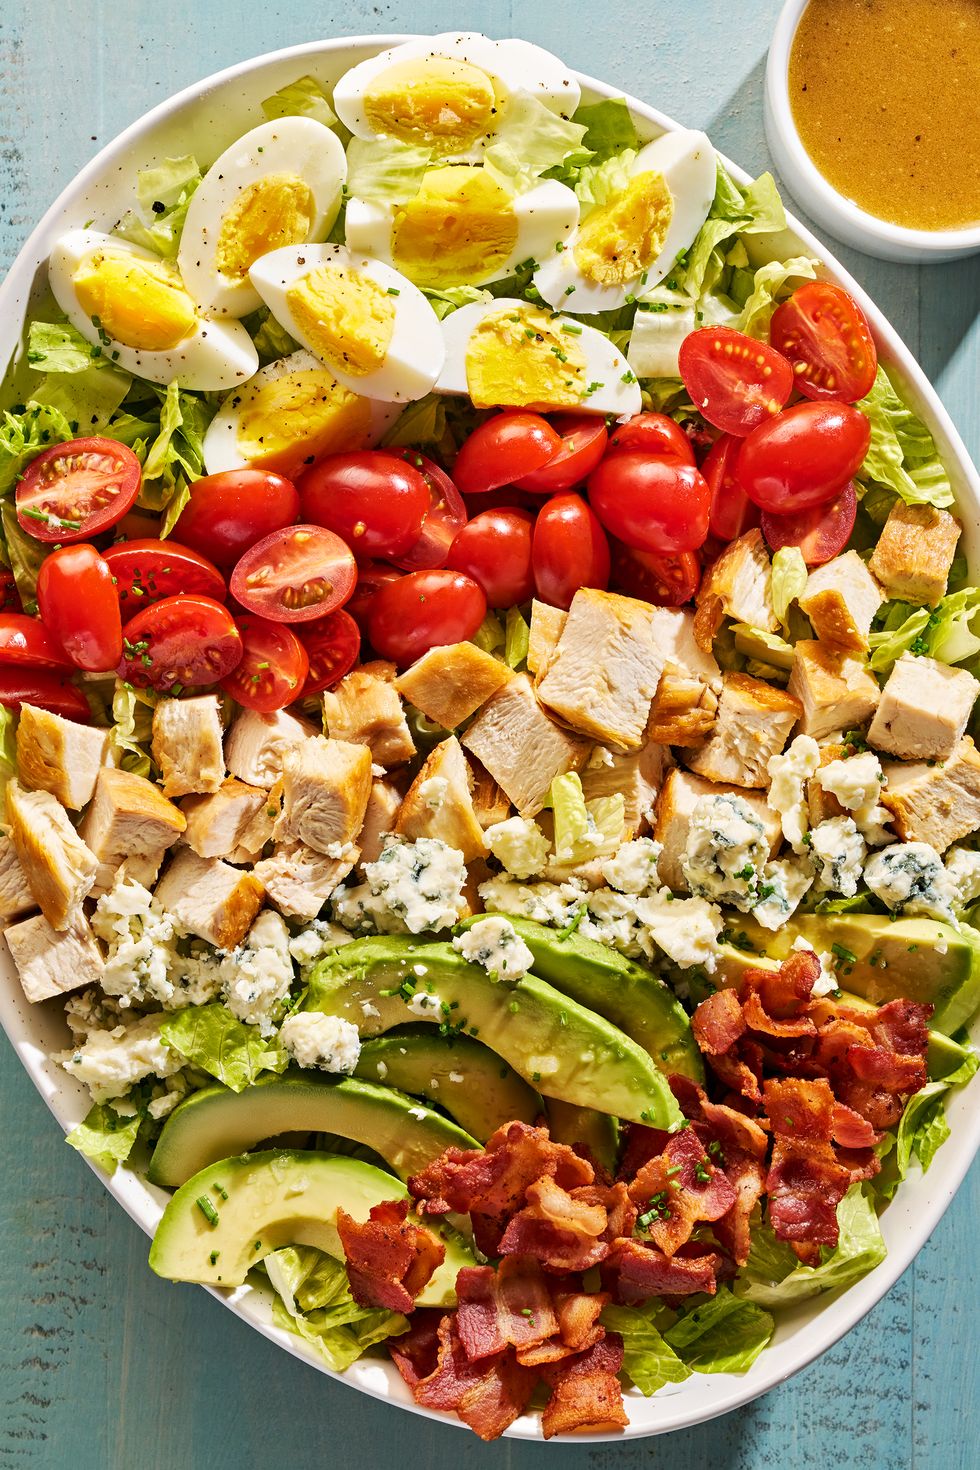 lettuce, bacon, avocado slices, hard boiled eggs, halves tomatoes, blue cheese and chicken pieces in a bowl